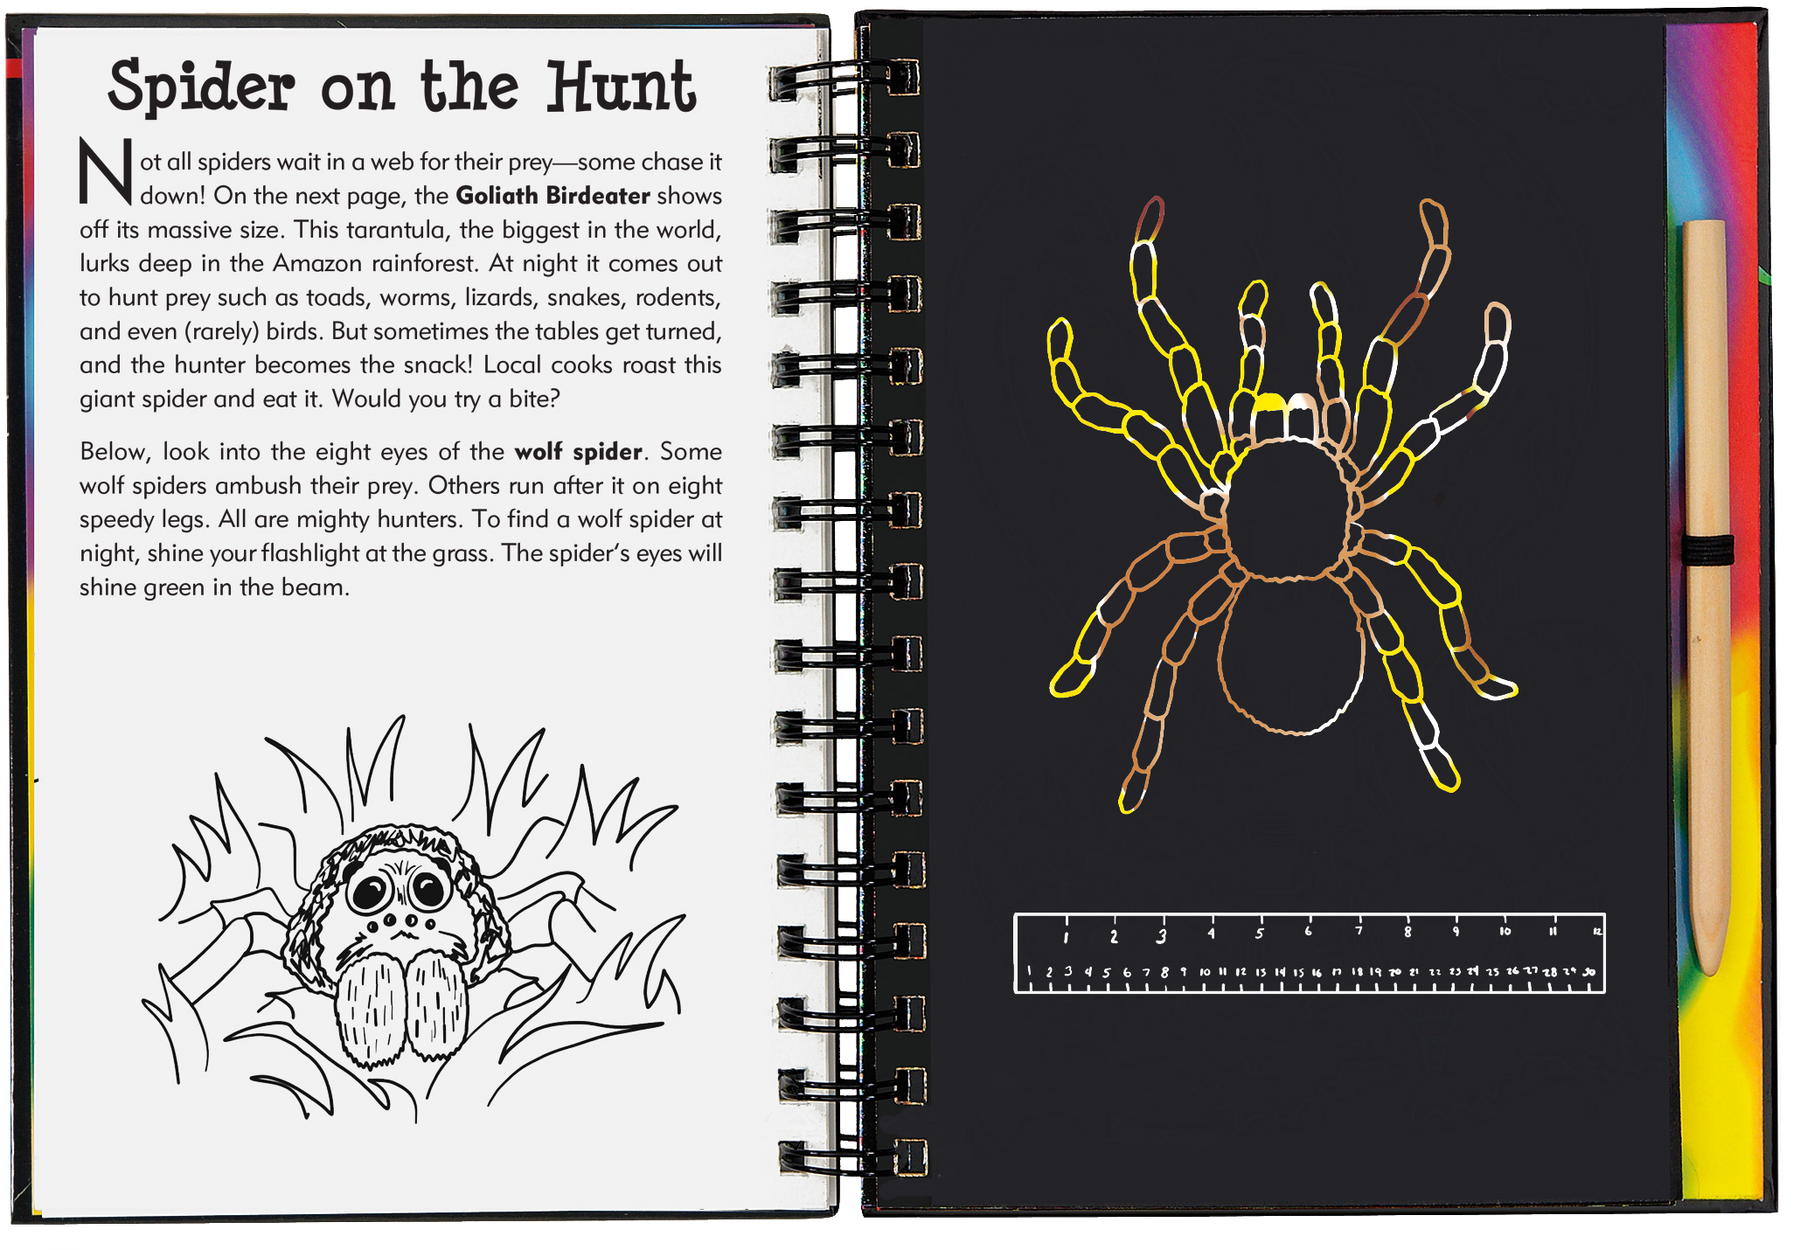 This is a Trace-Along Scratch and Sketch! White outlines on black scratch-off pages create a fun way for younger children (5 and up) to trace each illustration, revealing patterns, swirls, and holographic colors.